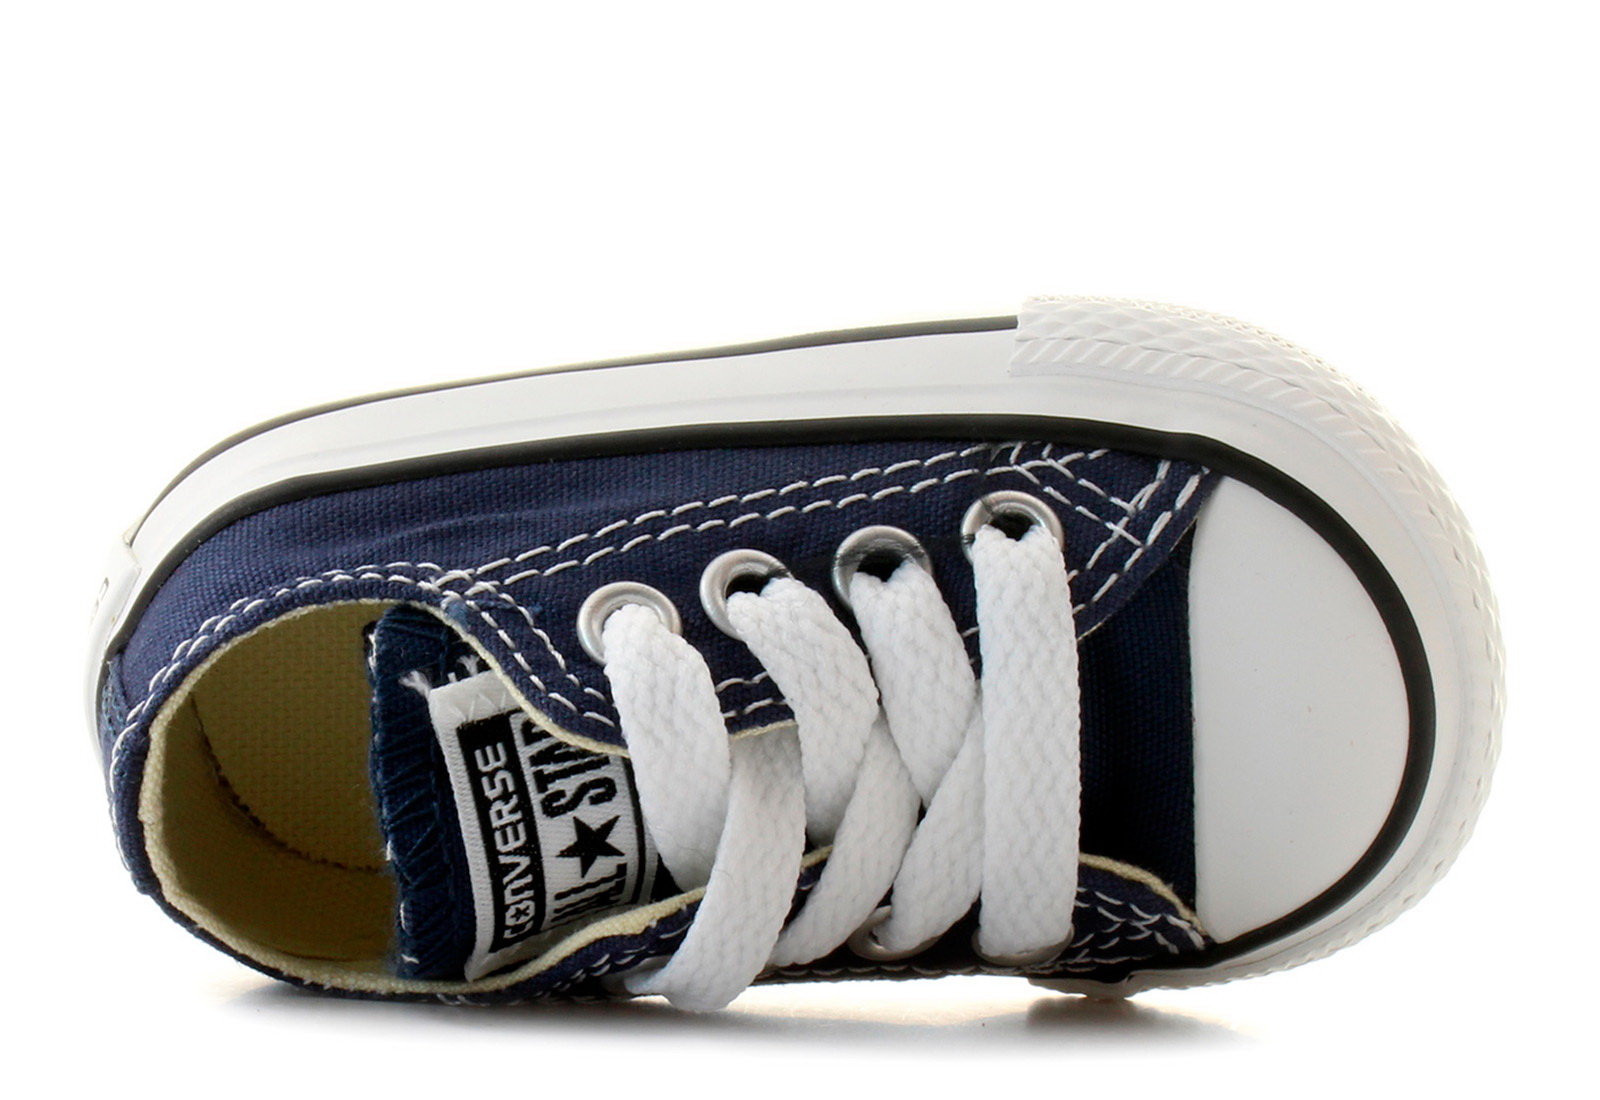 Converse Tenisi - Ct As Kids Core Ox - 7J237C - Office Shoes Romania